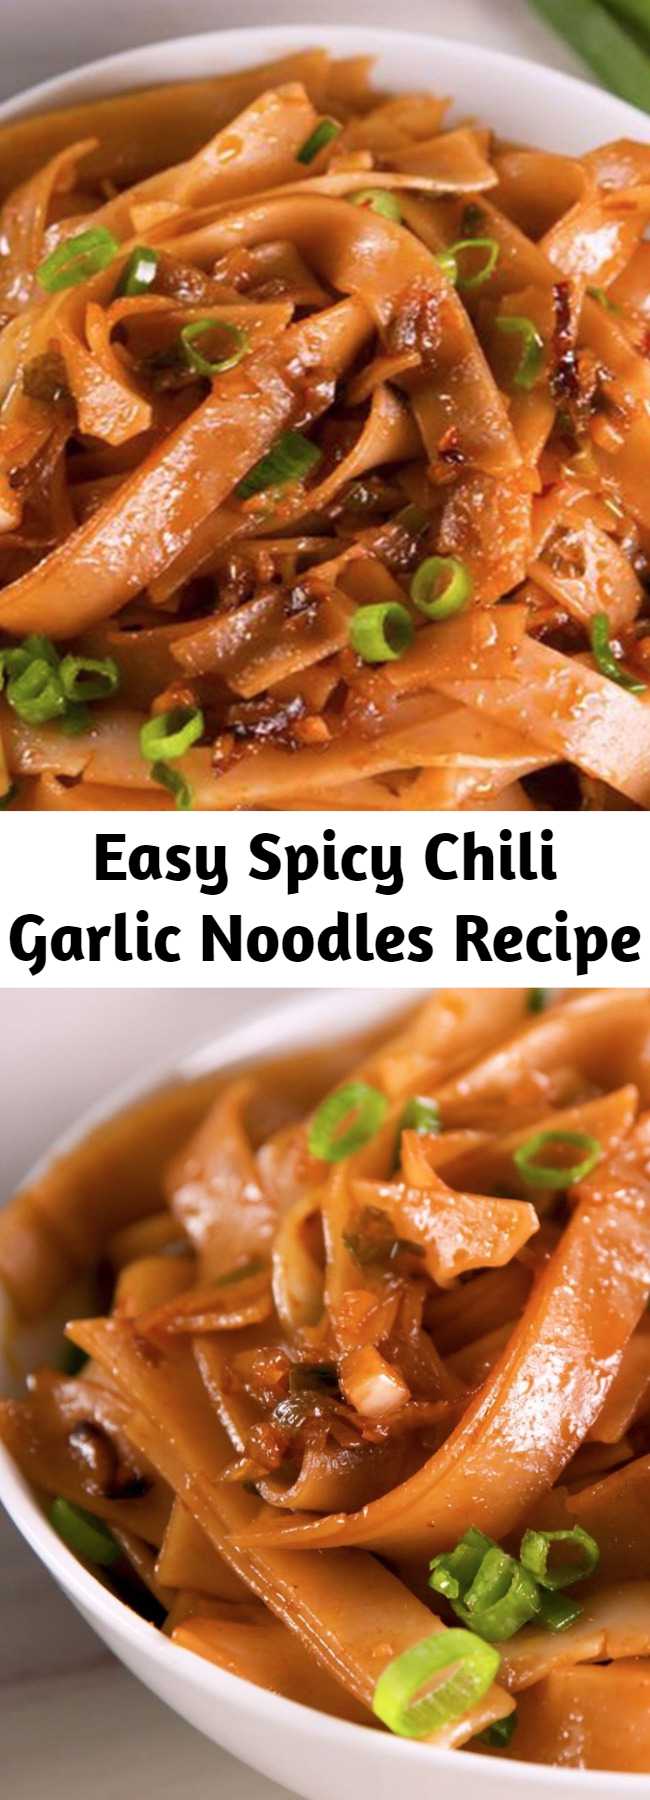 Easy Spicy Chili Garlic Noodles Recipe - The sauce for these noodles come together in less time than it takes your pasta water to boil. This dish is easy, fast, and spicy. Adjust the chili garlic sauce as you like, but we love the sweet heat of this dish as is. Prepare yourselves. #easyrecipe #food #noodles #asian #pasta